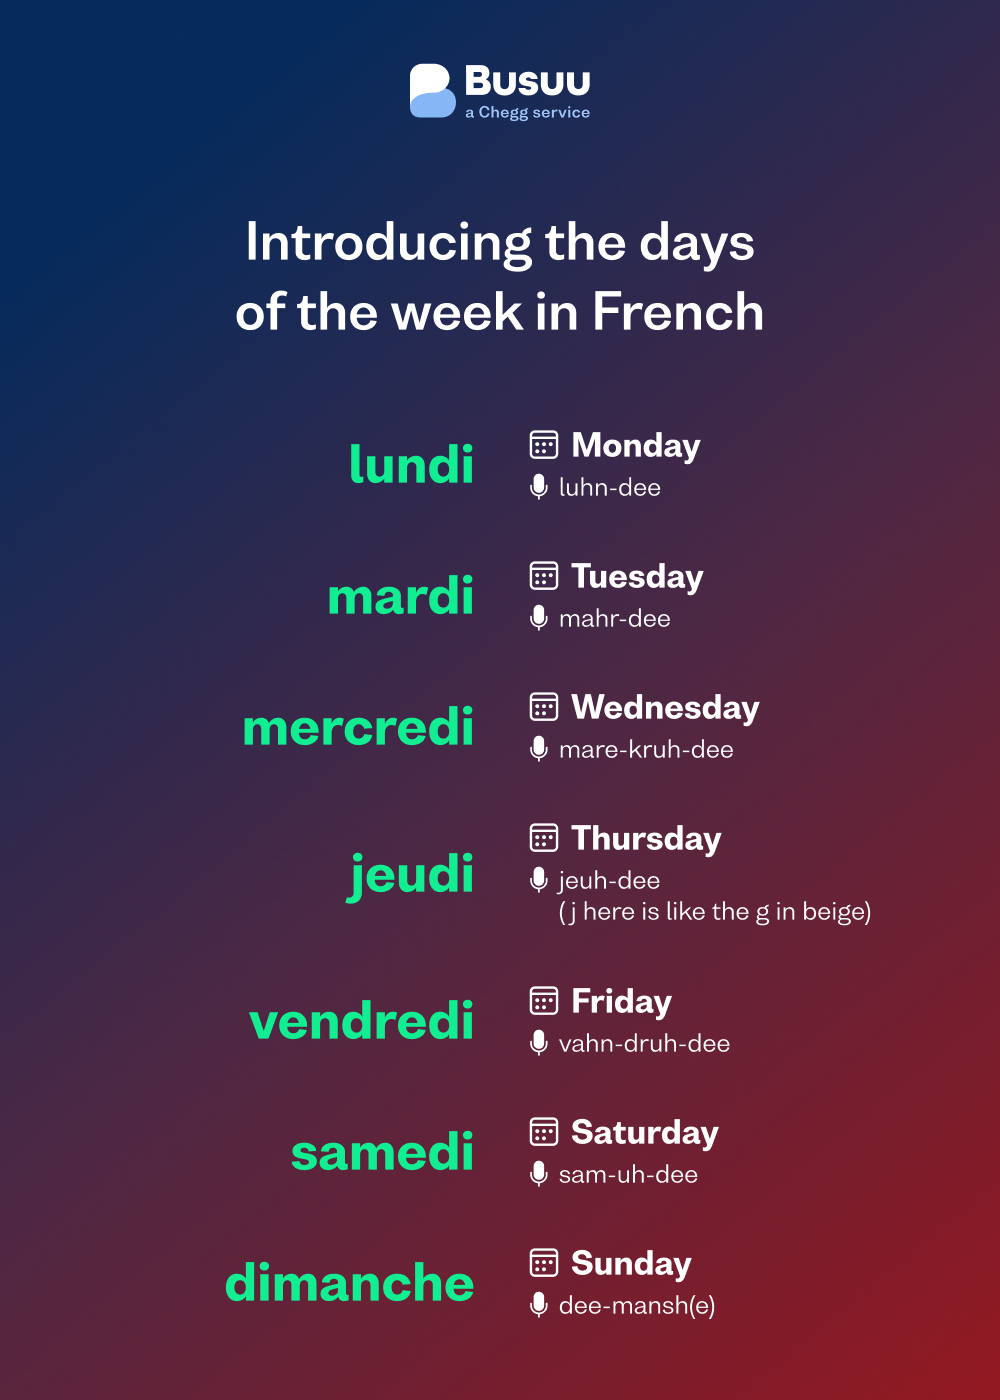 easy-method-for-memorising-the-french-days-of-the-week-busuu